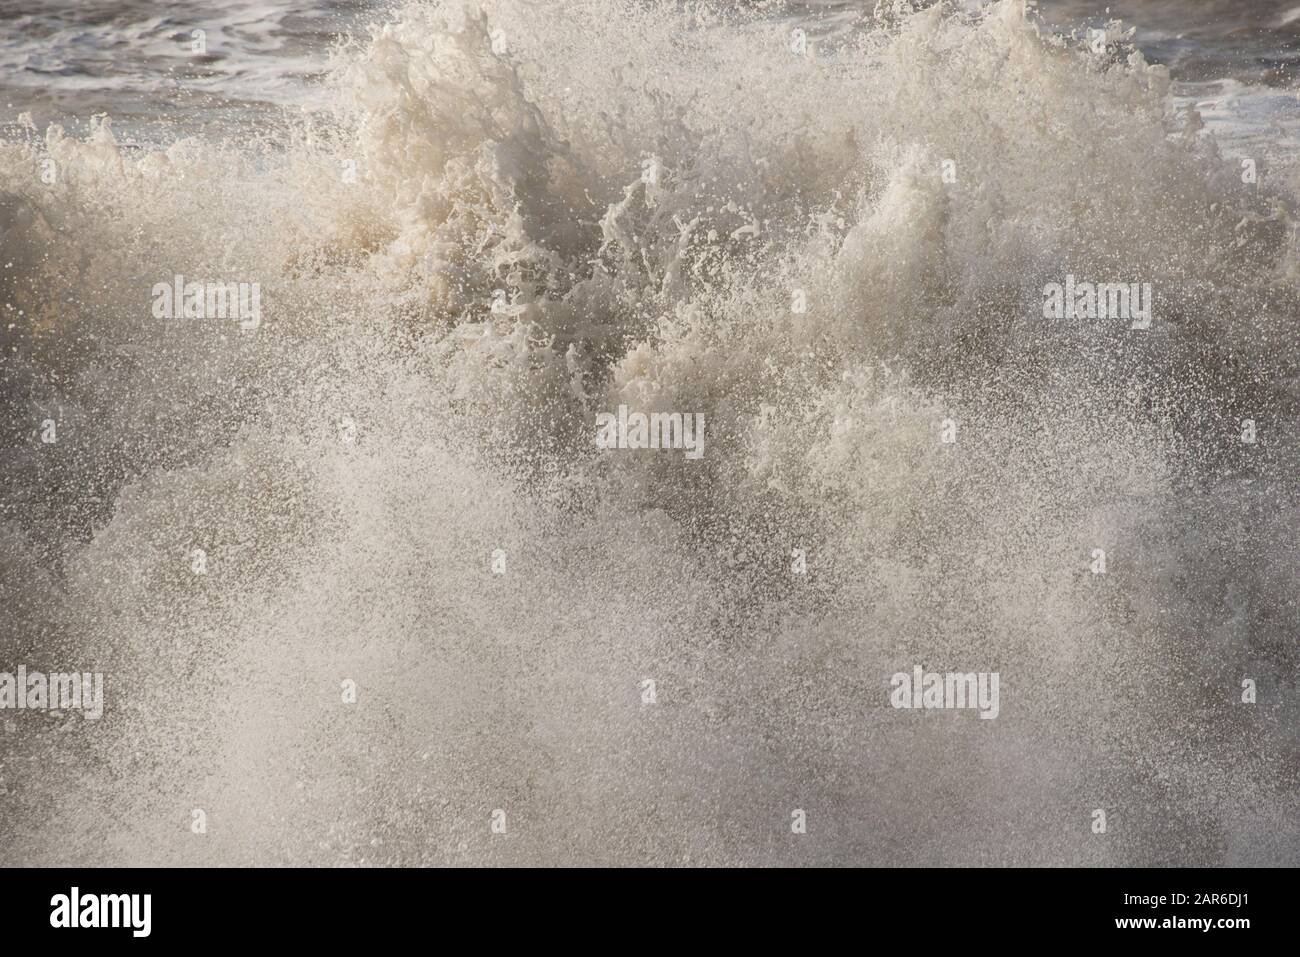 High waves, breakers from as Channel storm with whipped up beach sand eroding the coastline on Hive Beach, Dorset, January Stock Photo